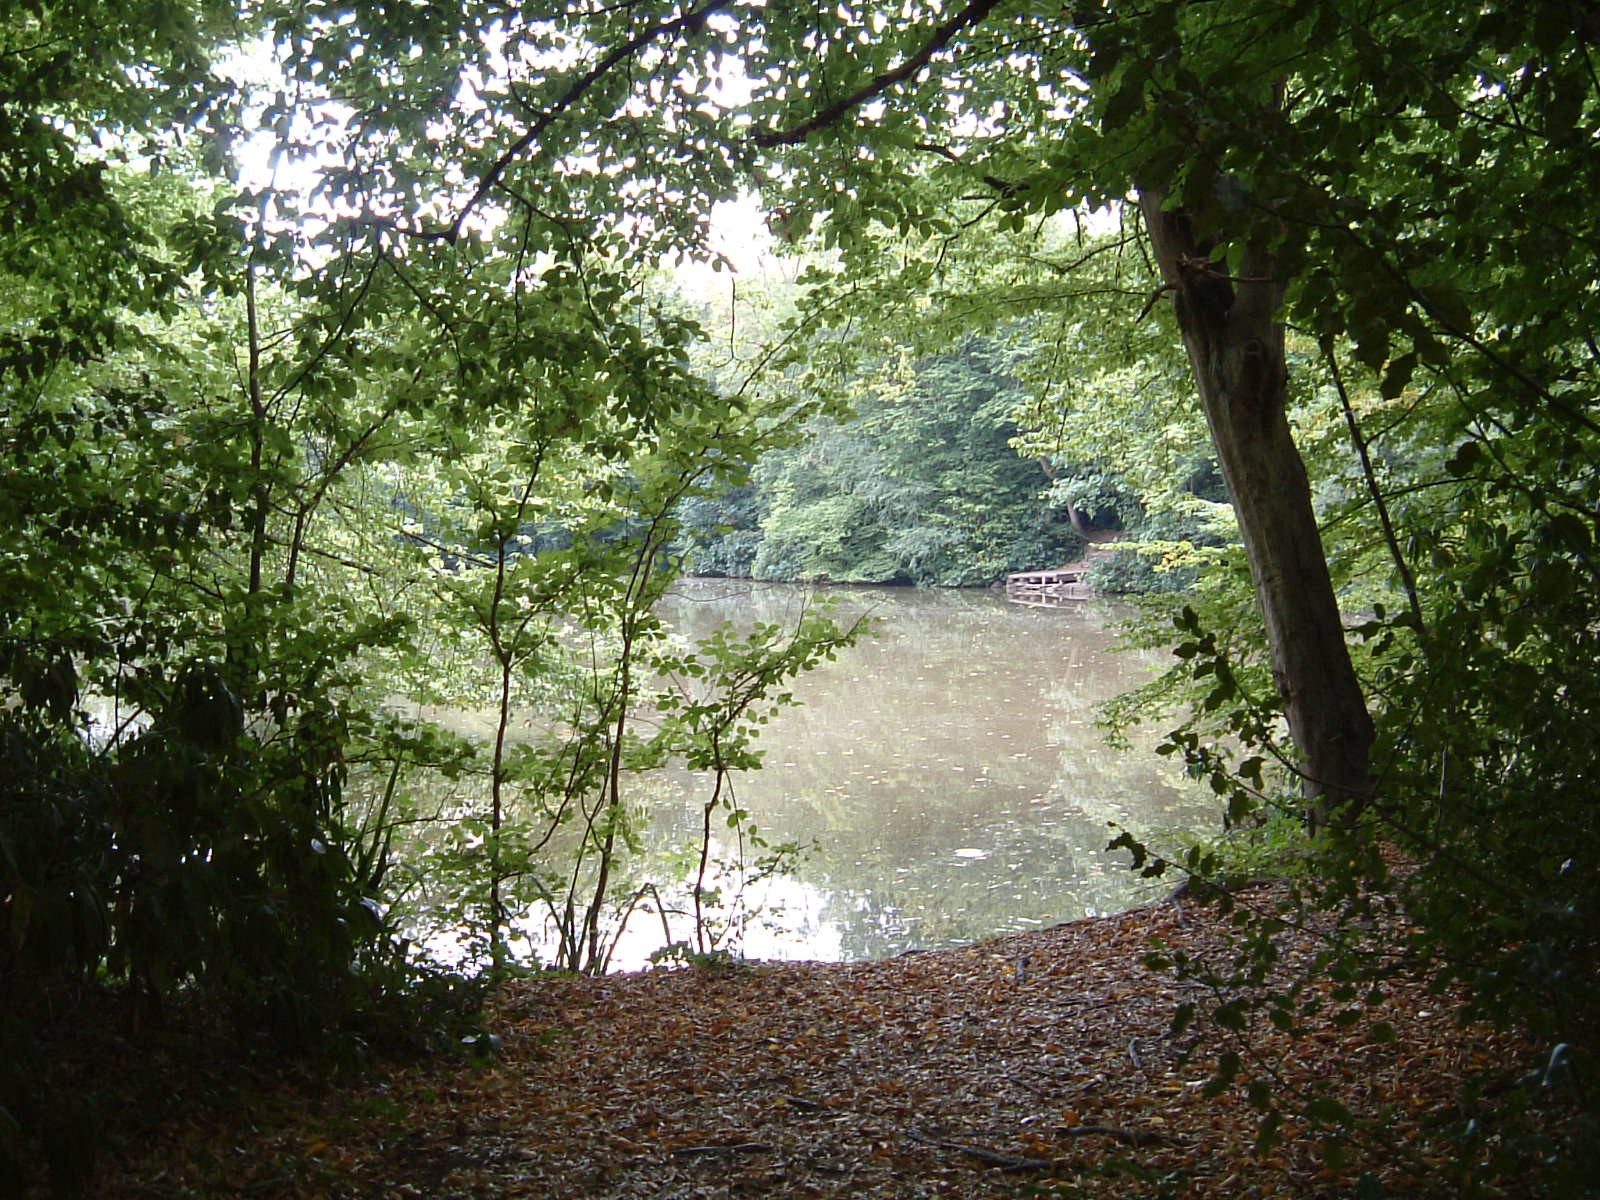 A pond, which may or may not be the fishpond of Elsynge Hall